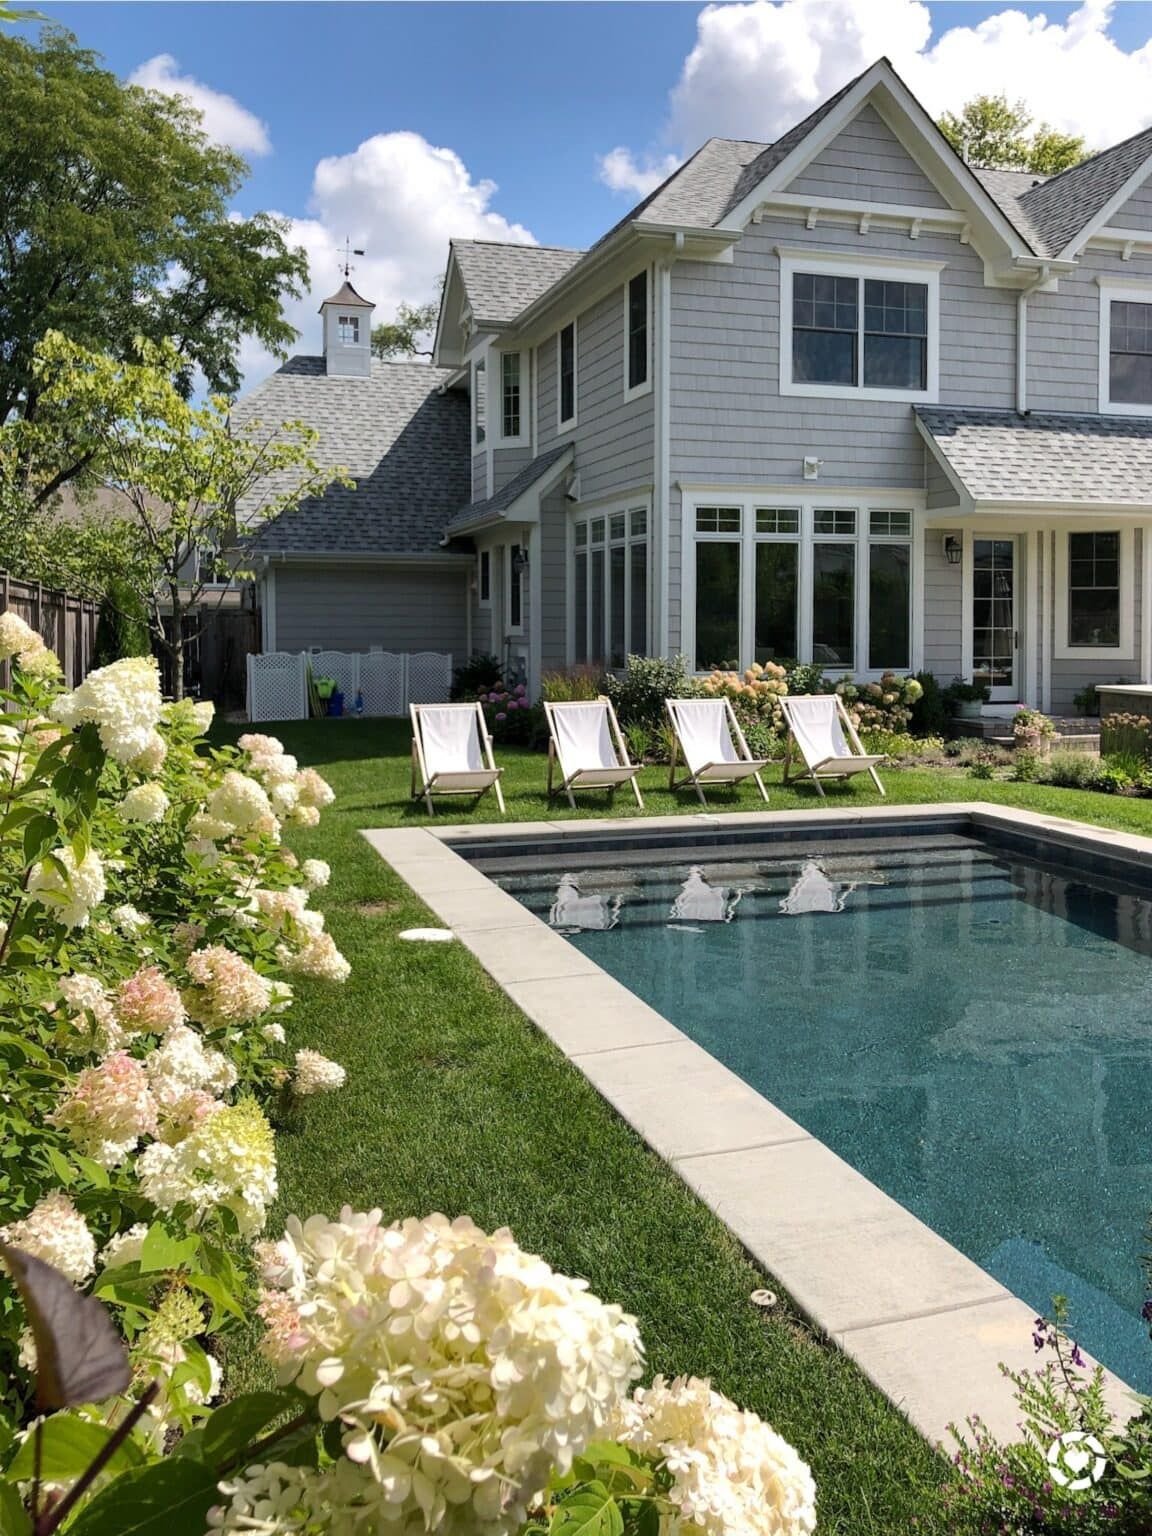 10 Hamptons-Style Swimming Pools to Inspire Your Summer.jpeg